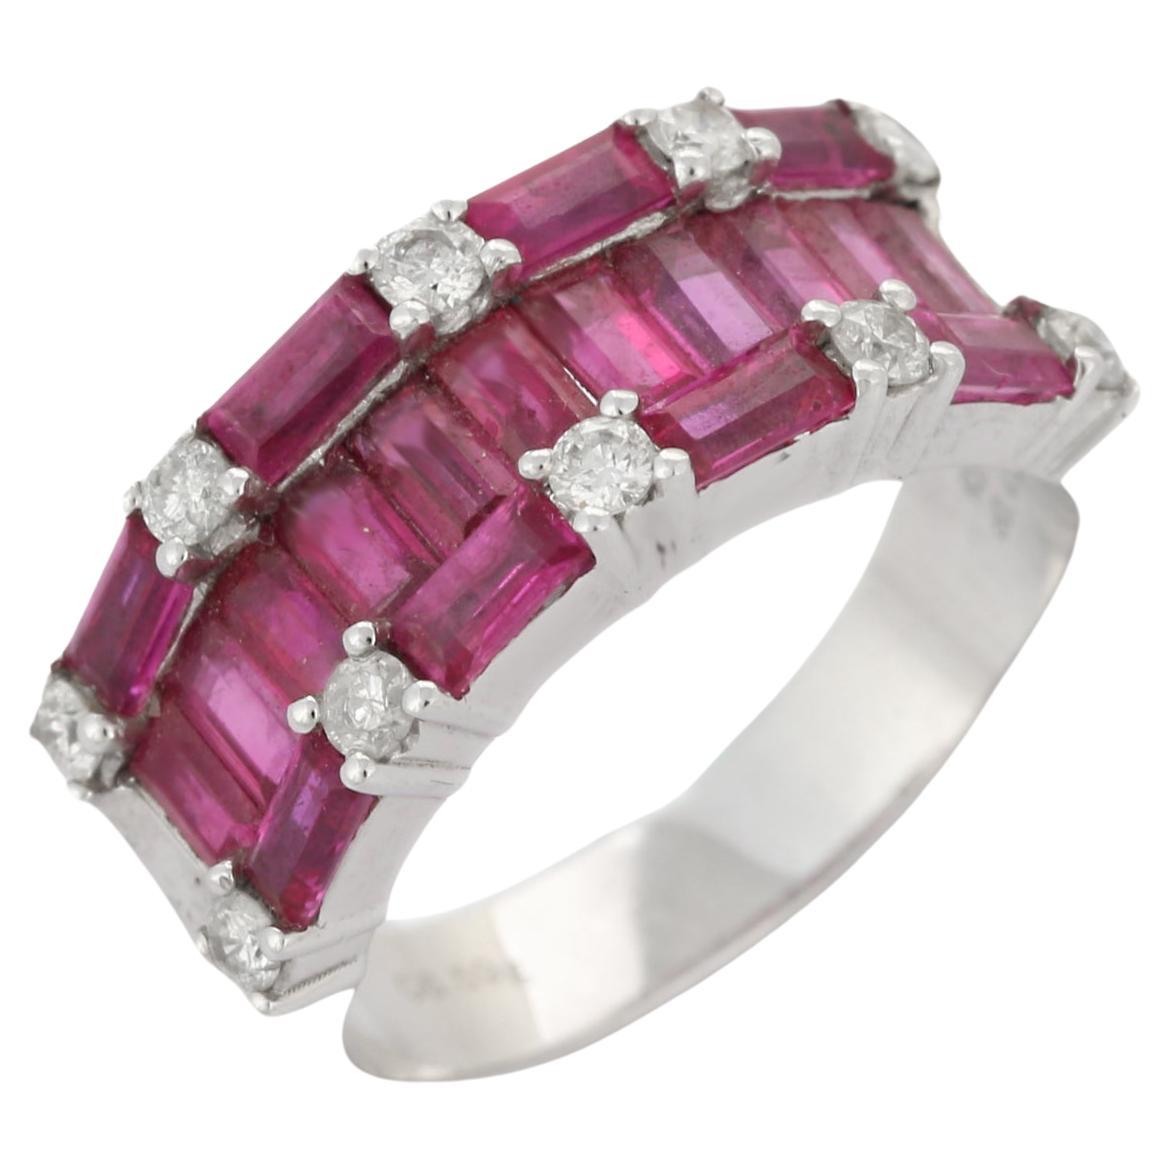 For Sale:  14K White Gold 3.19 Ct Ruby Baguettes Cluster Wedding Band Ring with Diamond